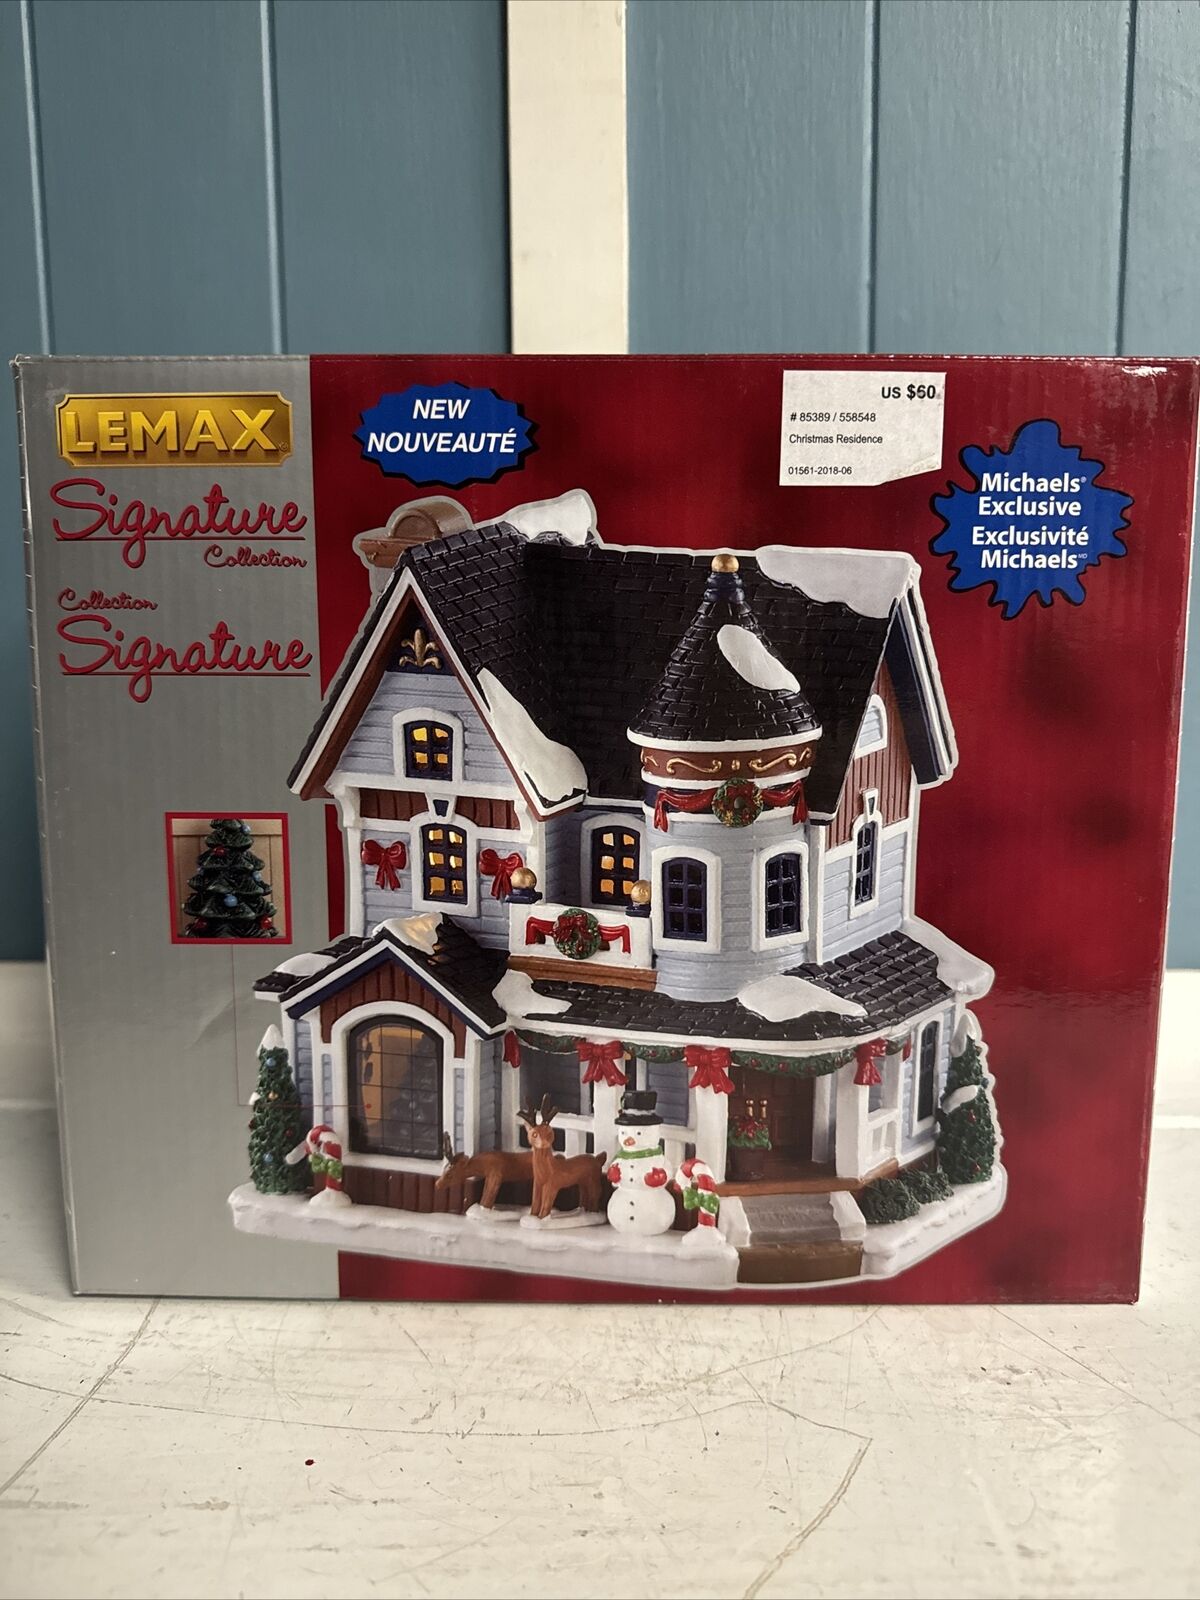 Lemax Signature Collection Porcelain Lighted Village Christmas Residence #85389